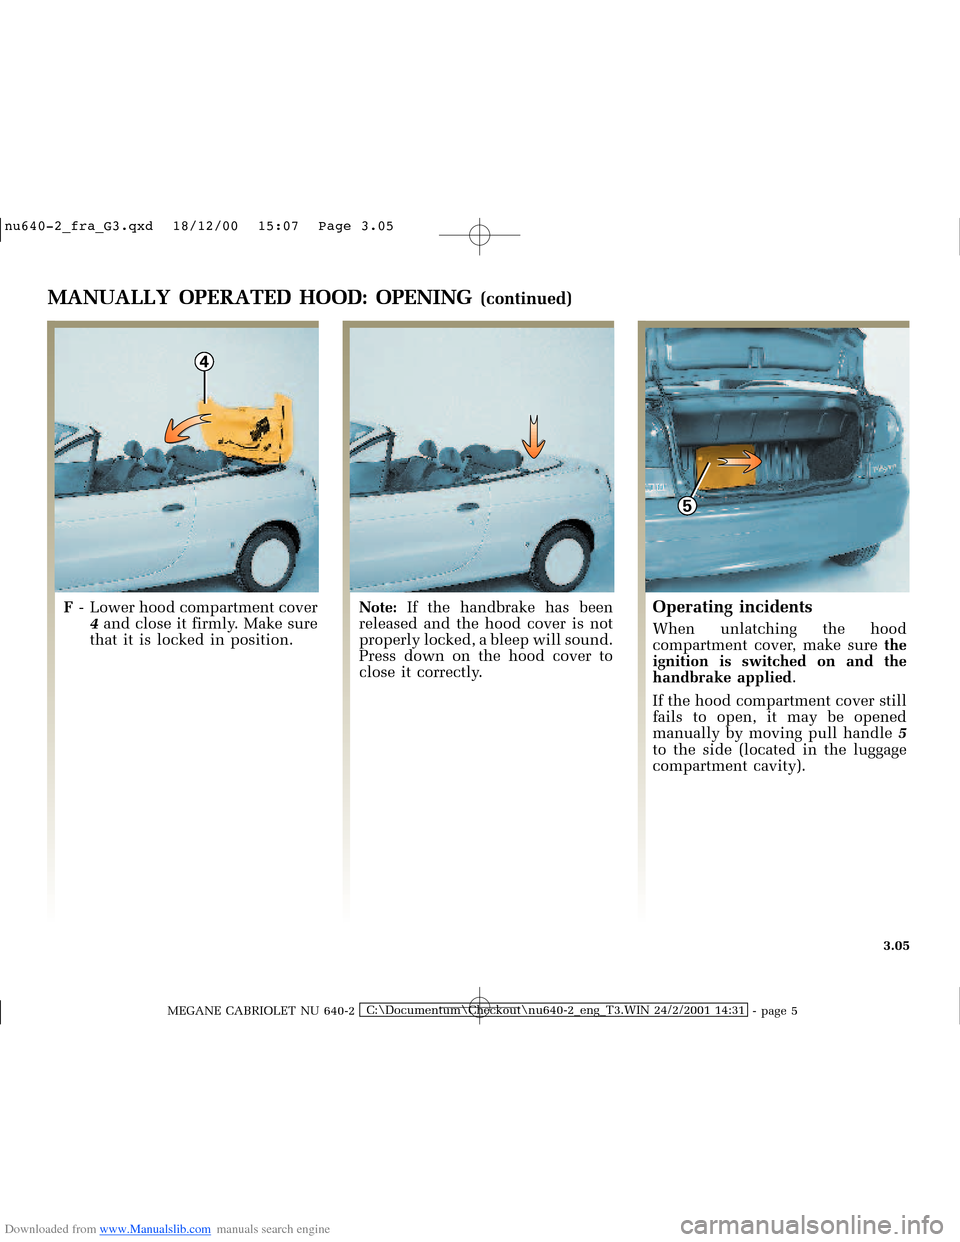 RENAULT MEGANE 2000 X64 / 1.G Manual Online Downloaded from www.Manualslib.com manuals search engine 4
5
�Q�X������B�I�U�D�B�*���T�[�G� � ��������� � ������ � �3�D�J�H� ����
MEGANE CABRIOLET NU 640-2C:\Documentum\